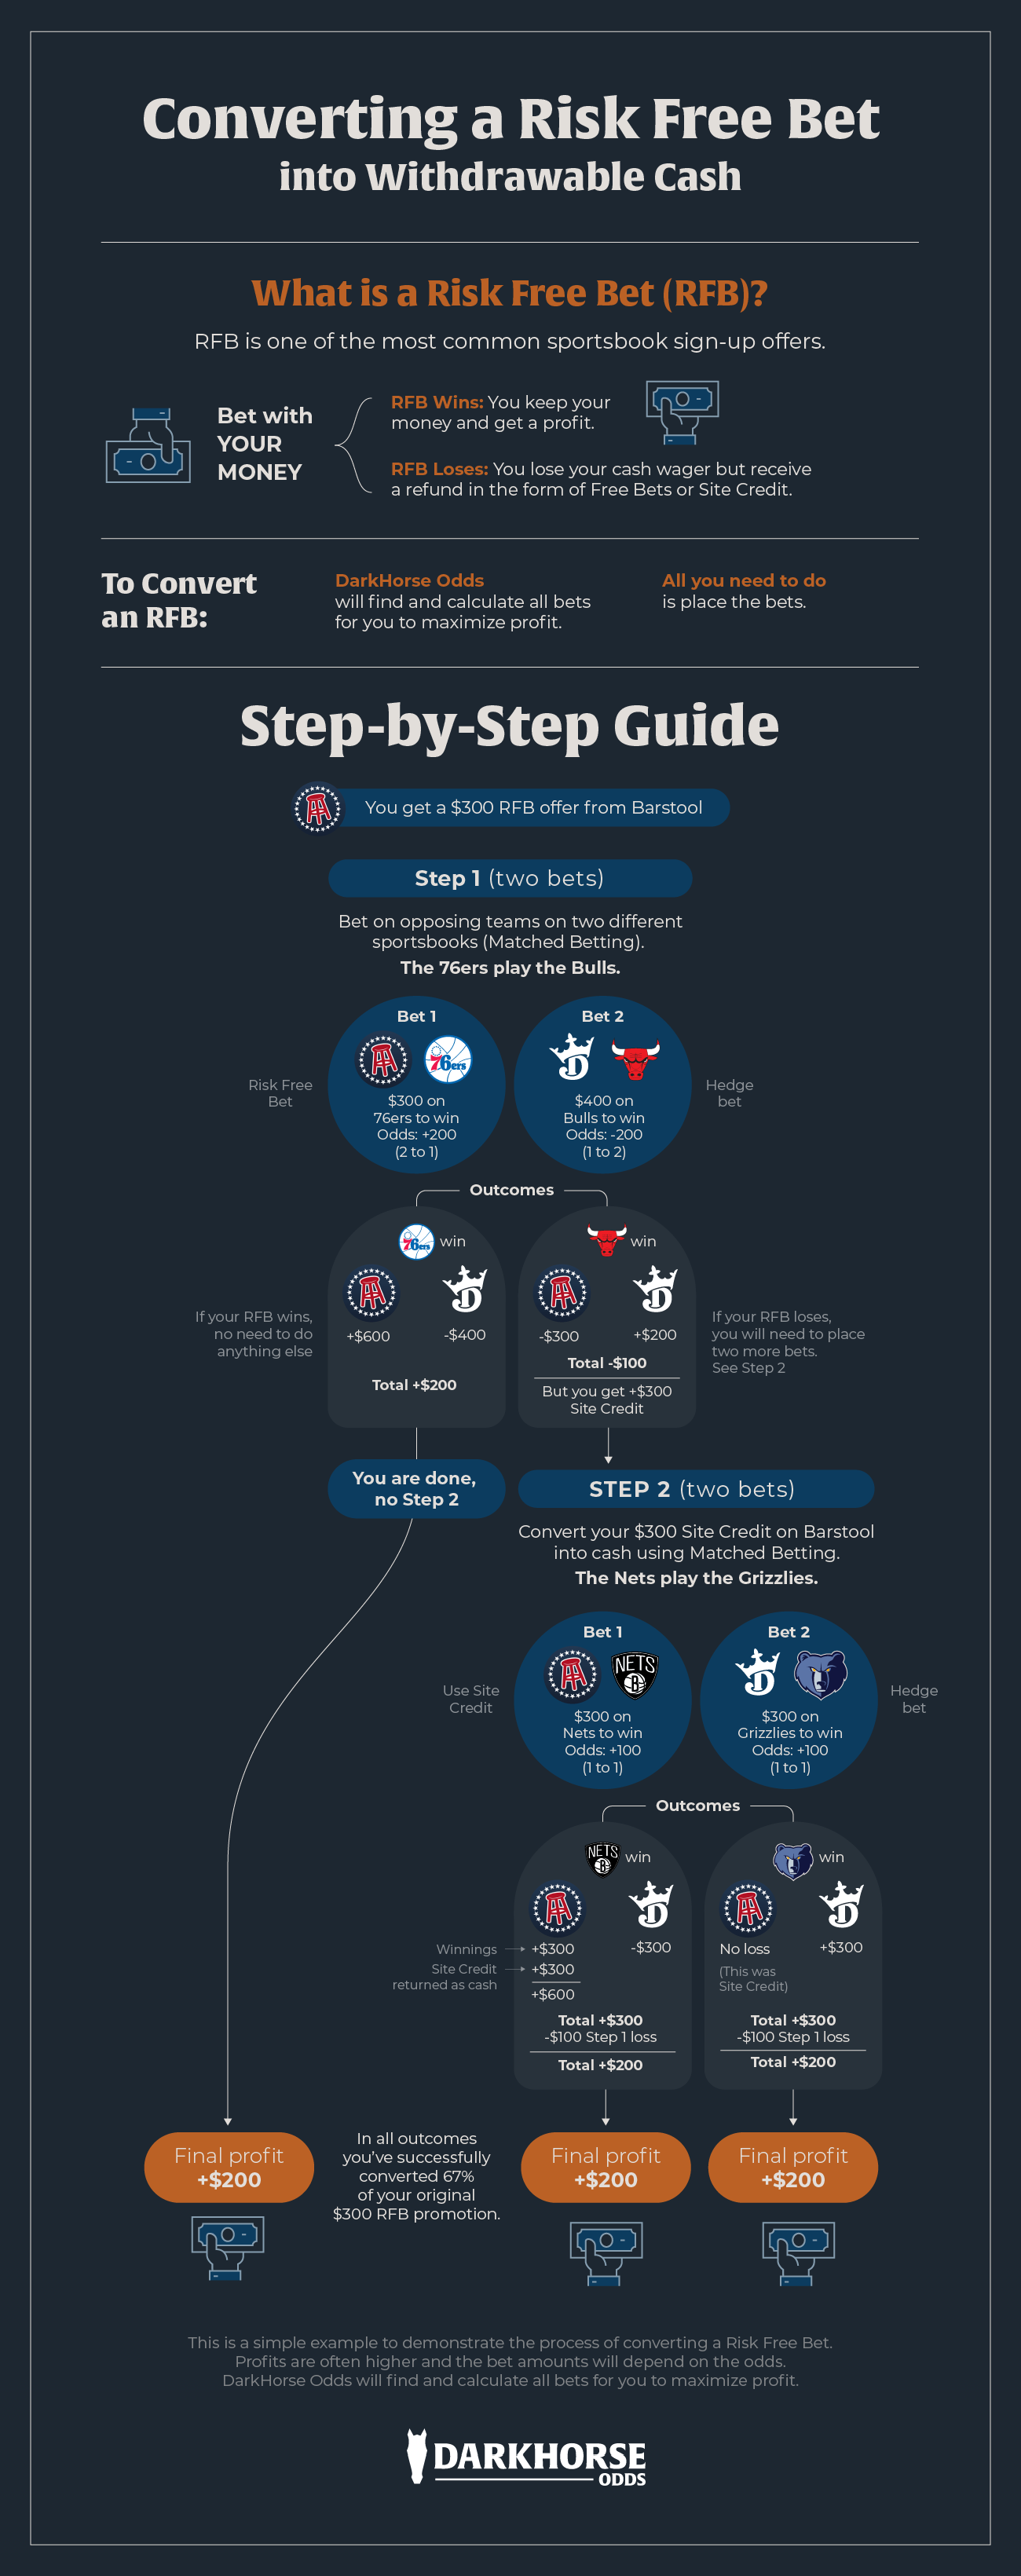 Infographic outlining the Risk Free Bet process